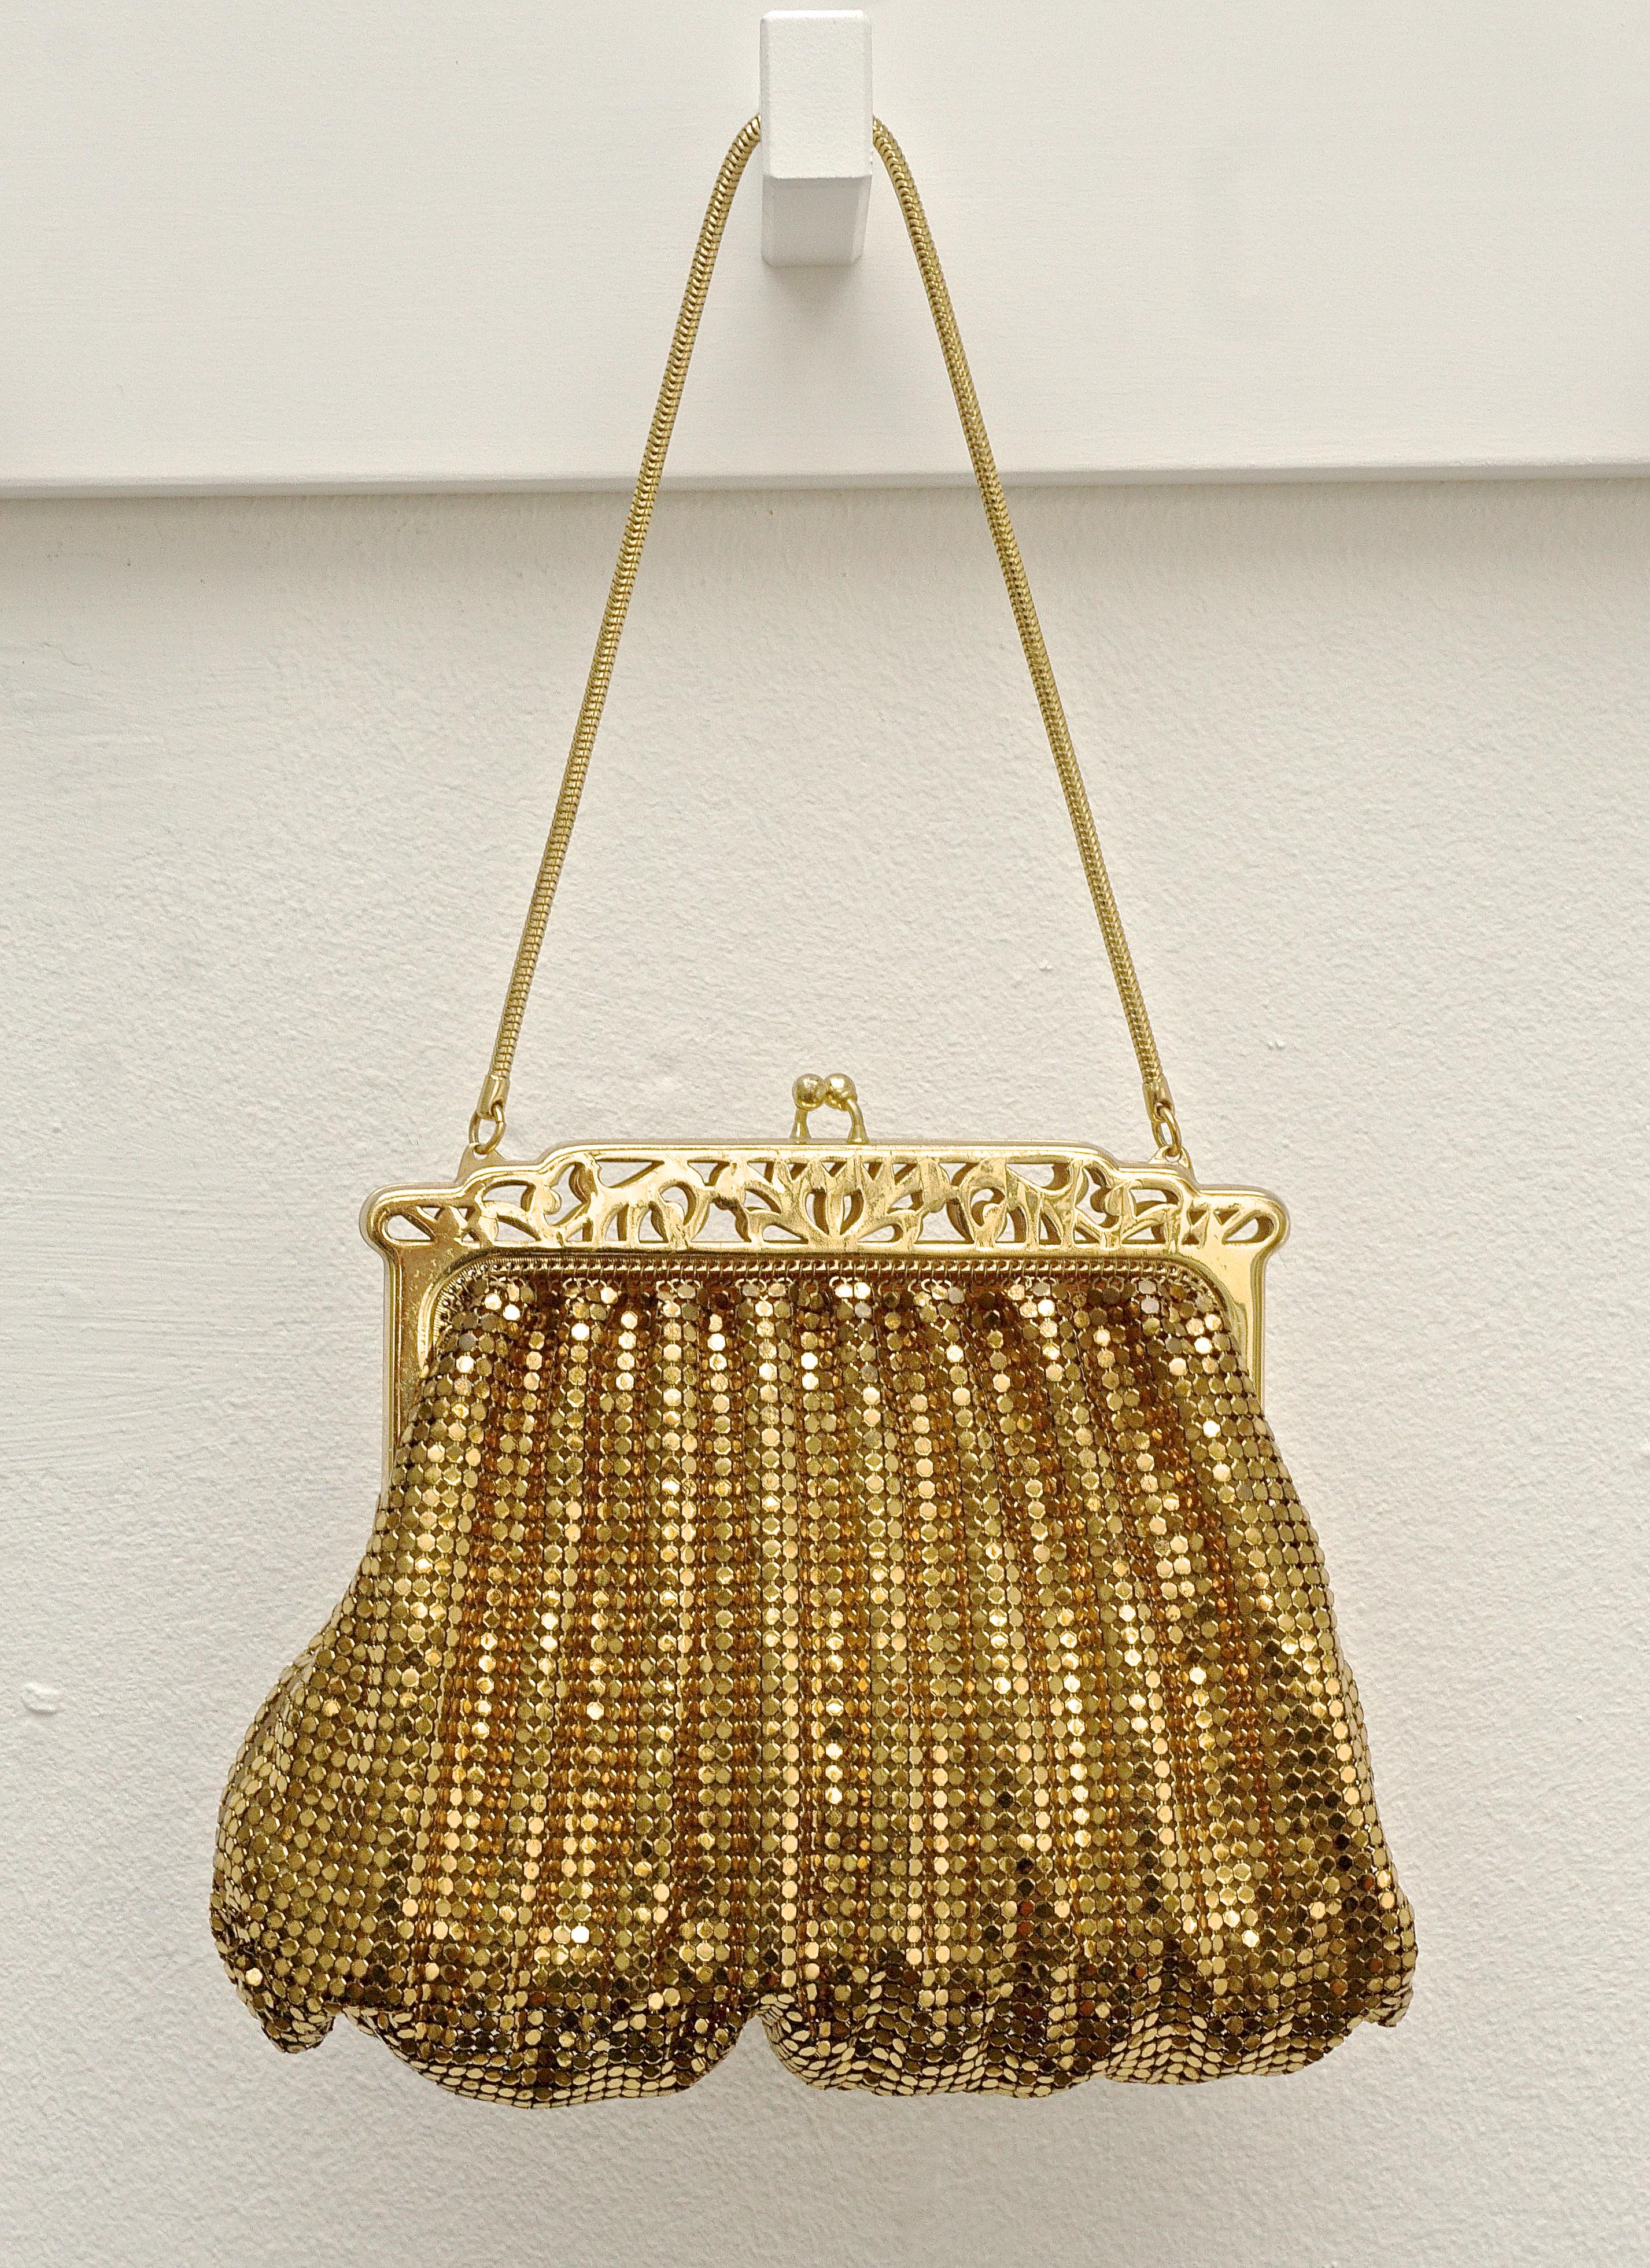 Brown Whiting & Davis Gold Mesh Bag with Cut-Out Frame